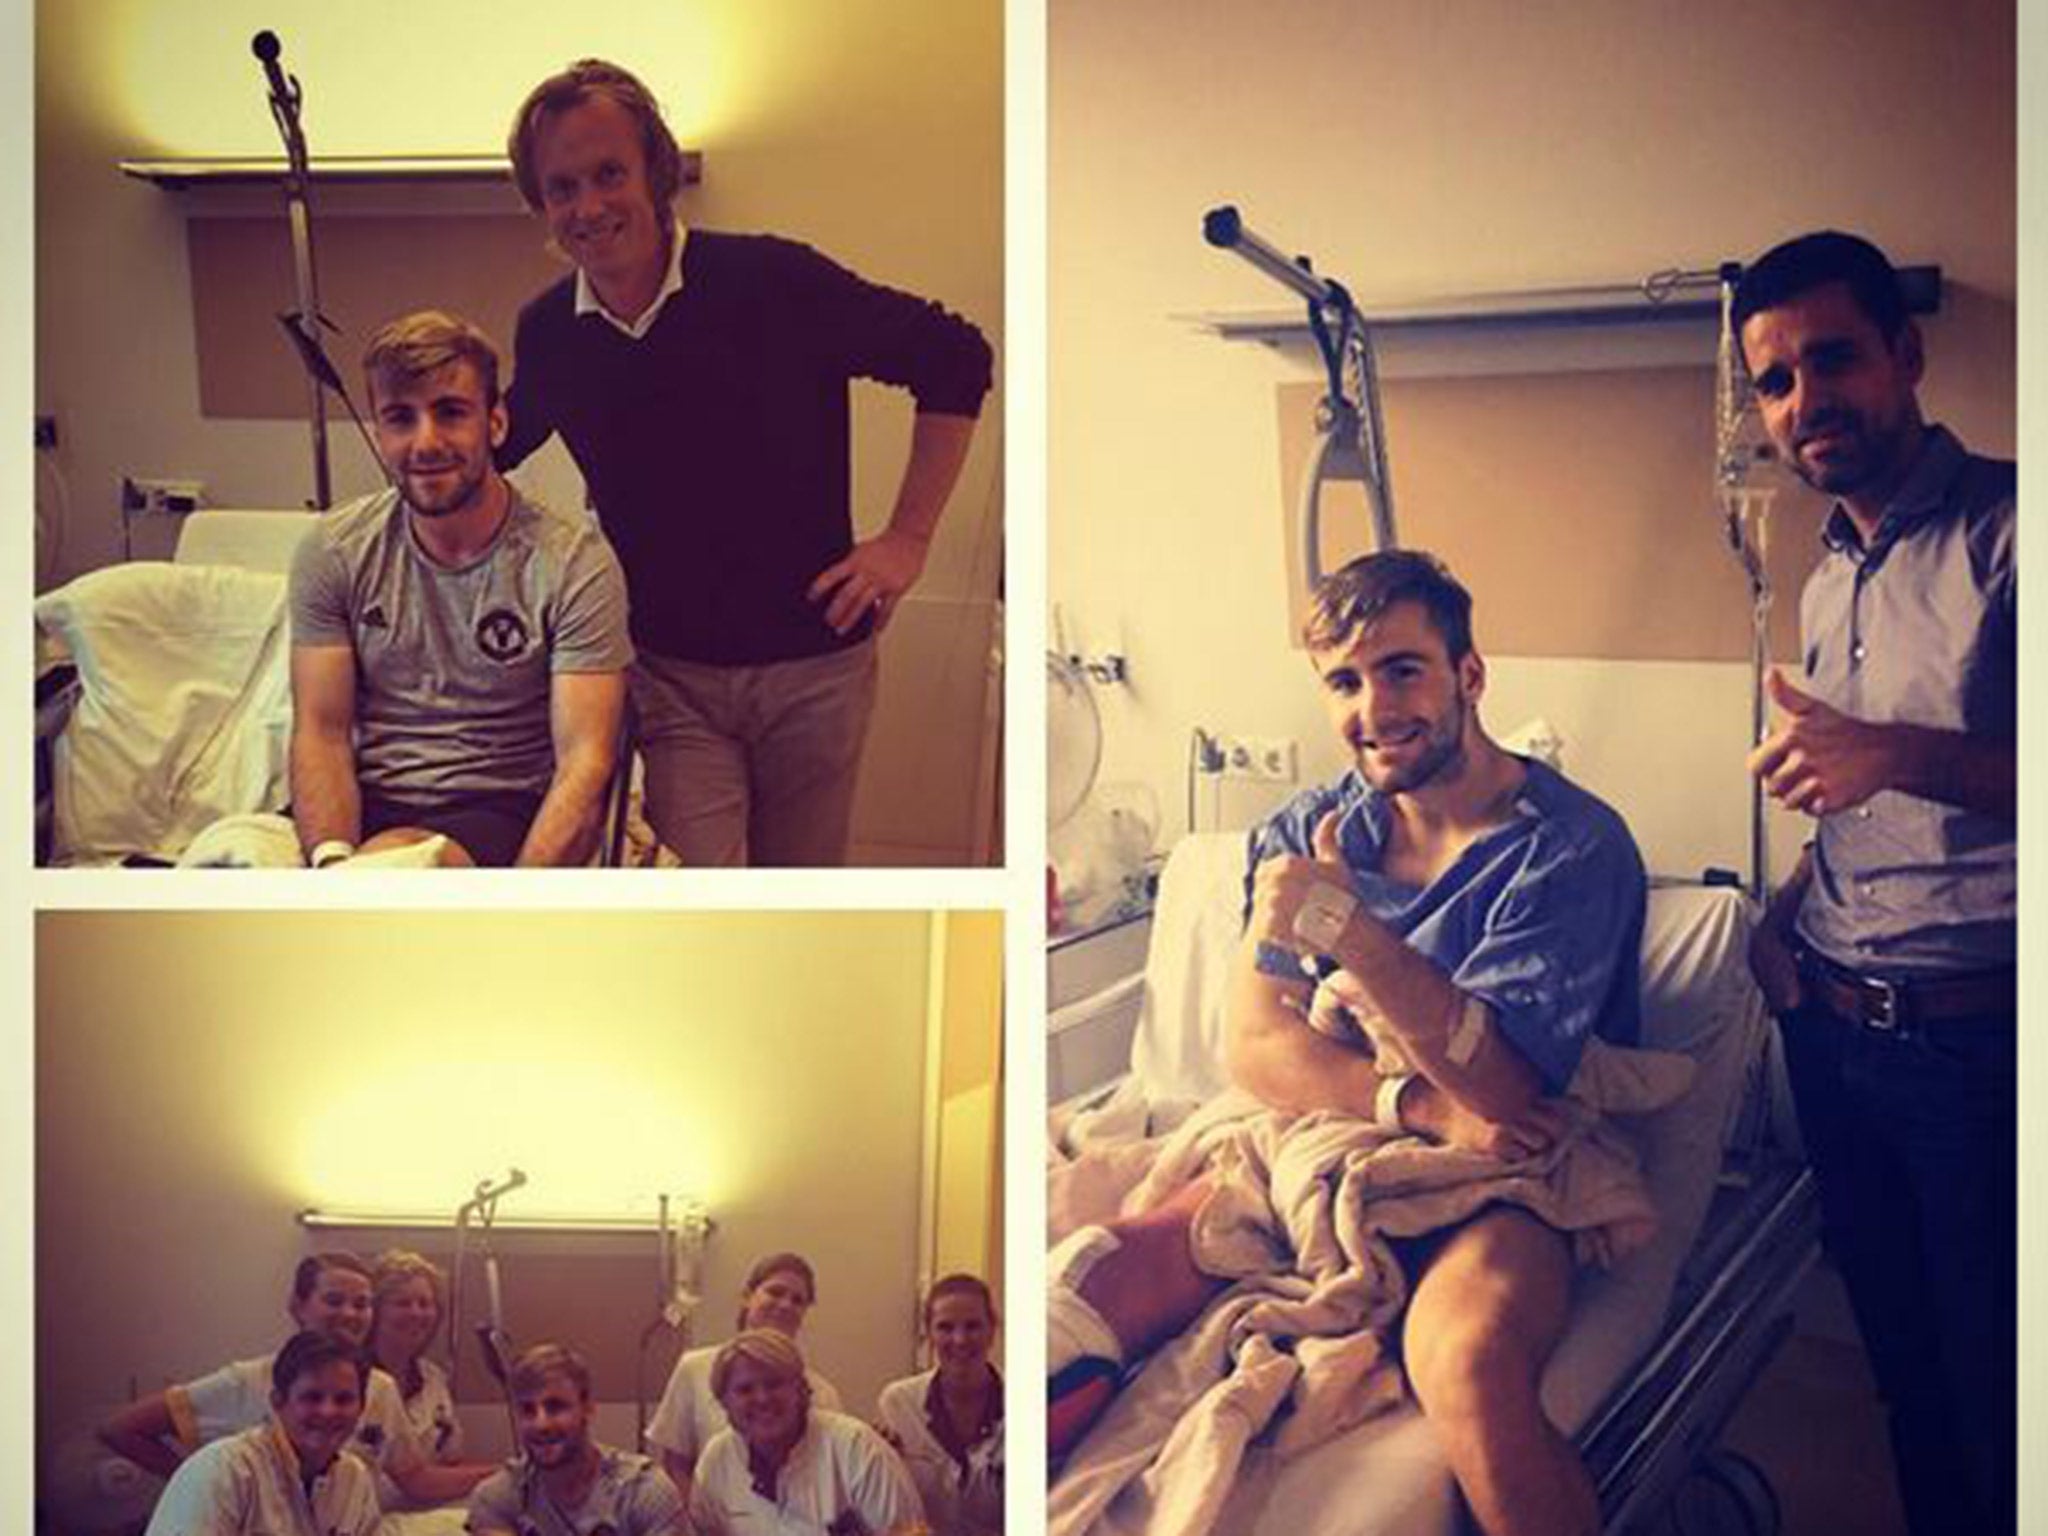 Luke Shaw's Instagram post from hospital in Eindhoven